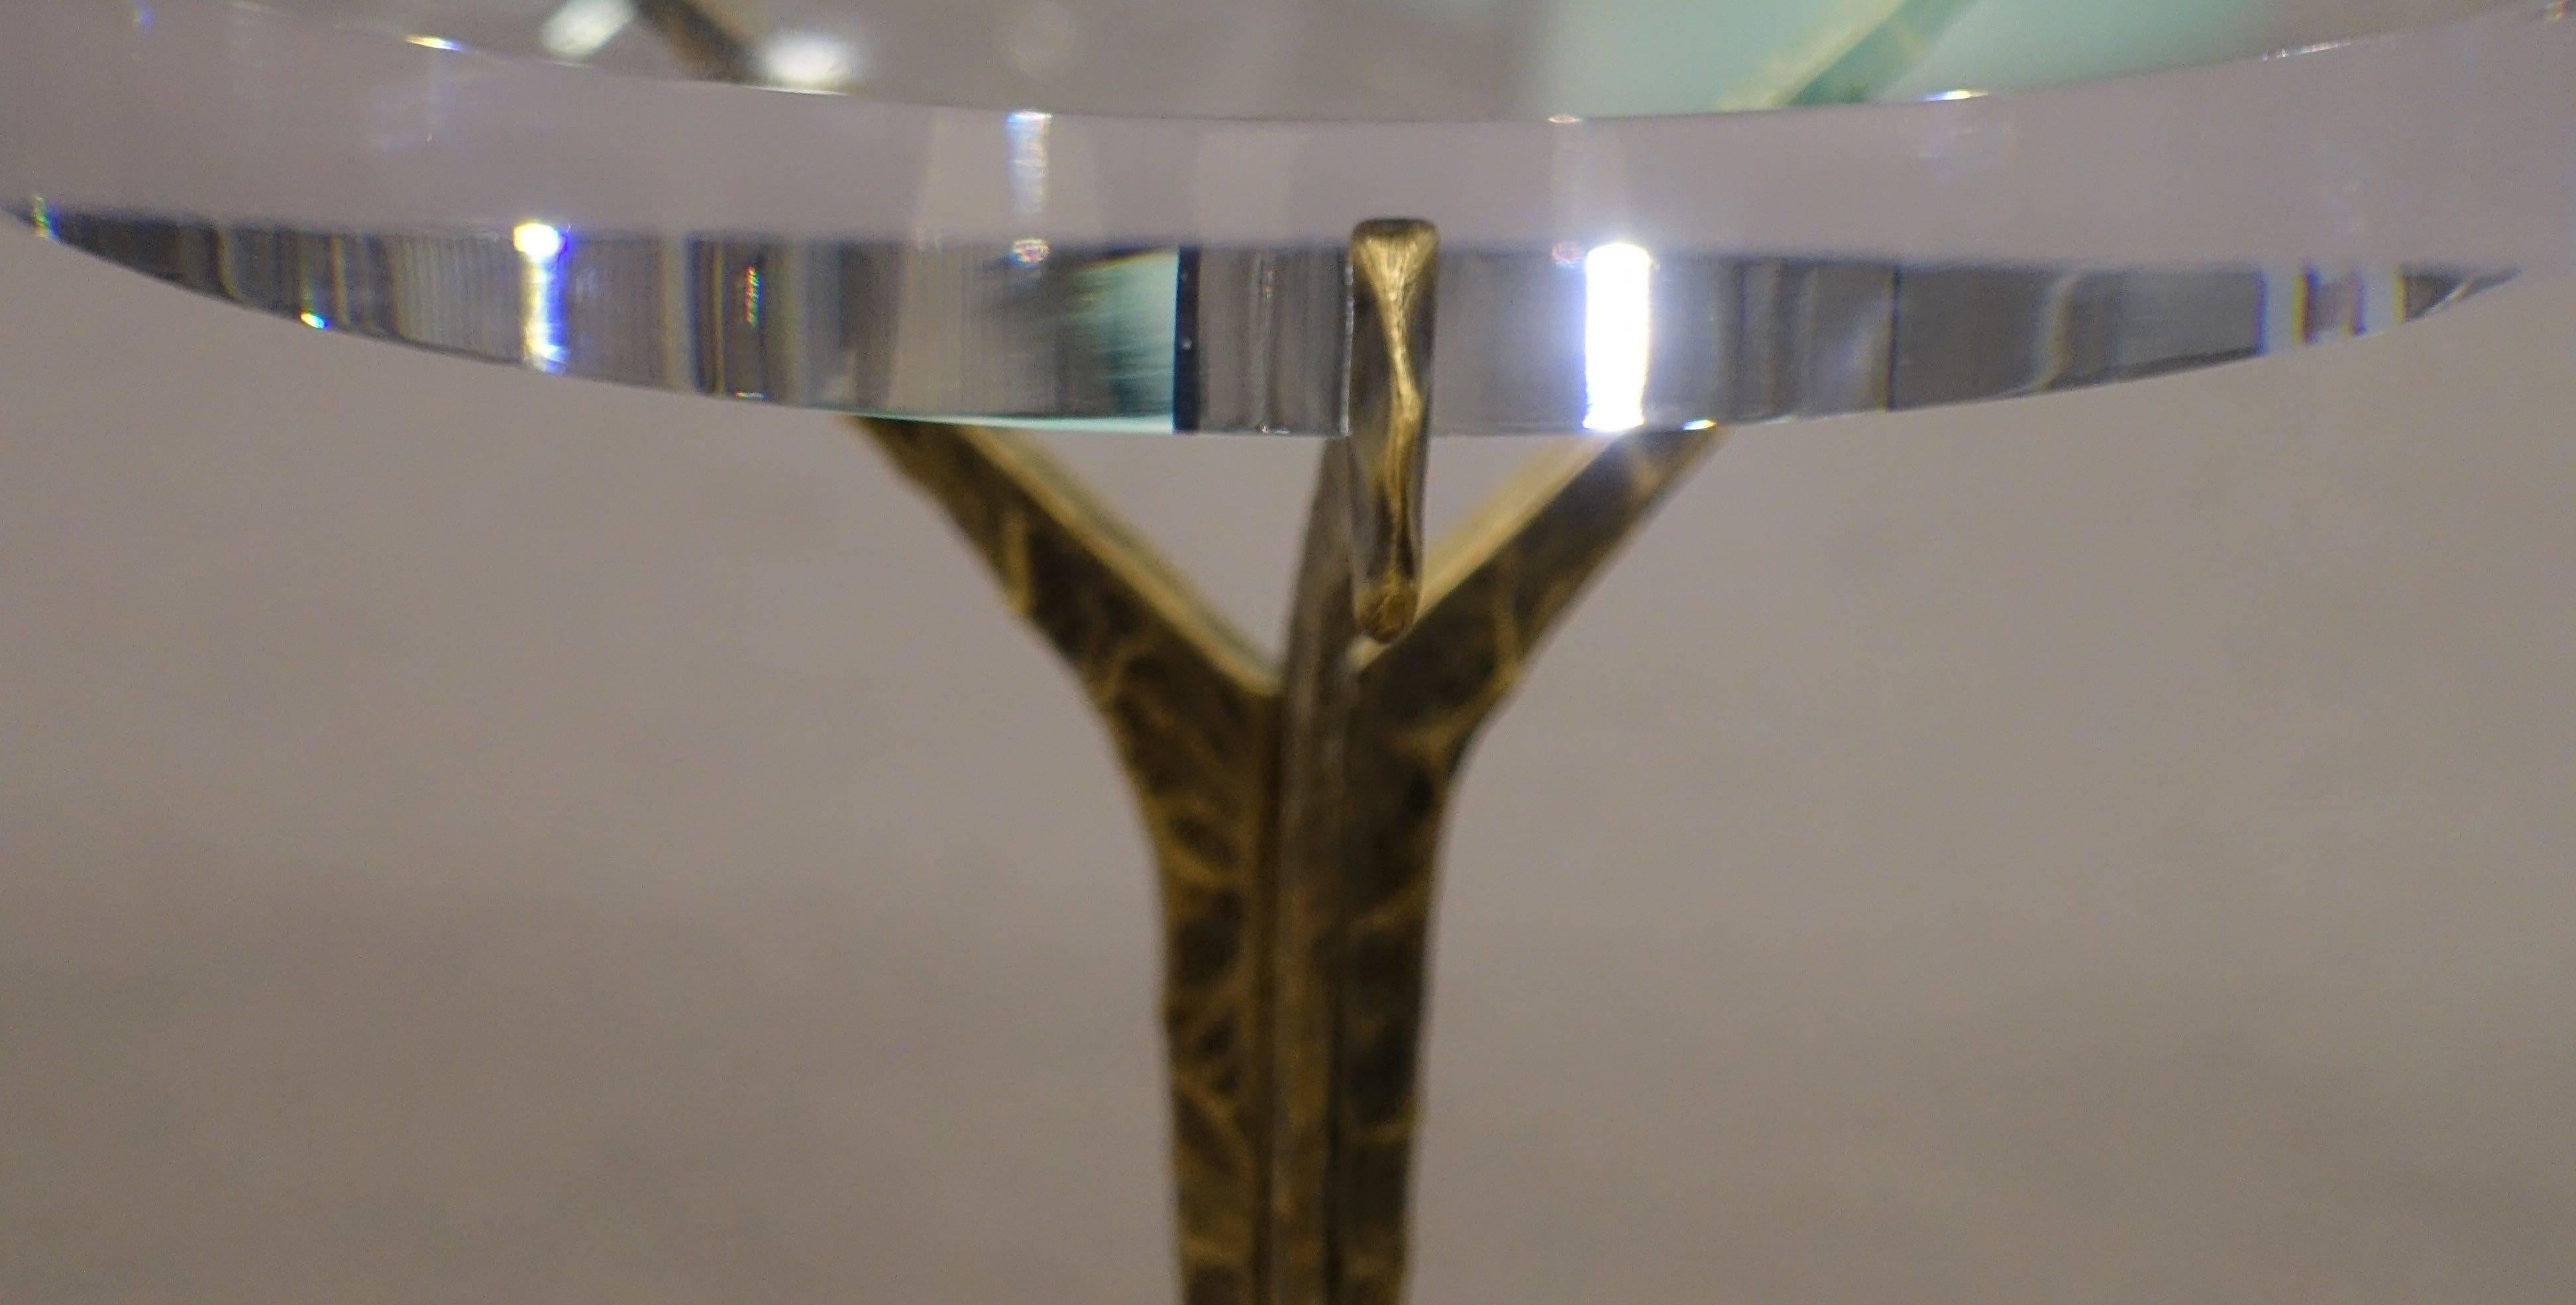 Portuguese Acrylic Top, Hammered Brass Base Cocktail Table with Portugal, Contemporary